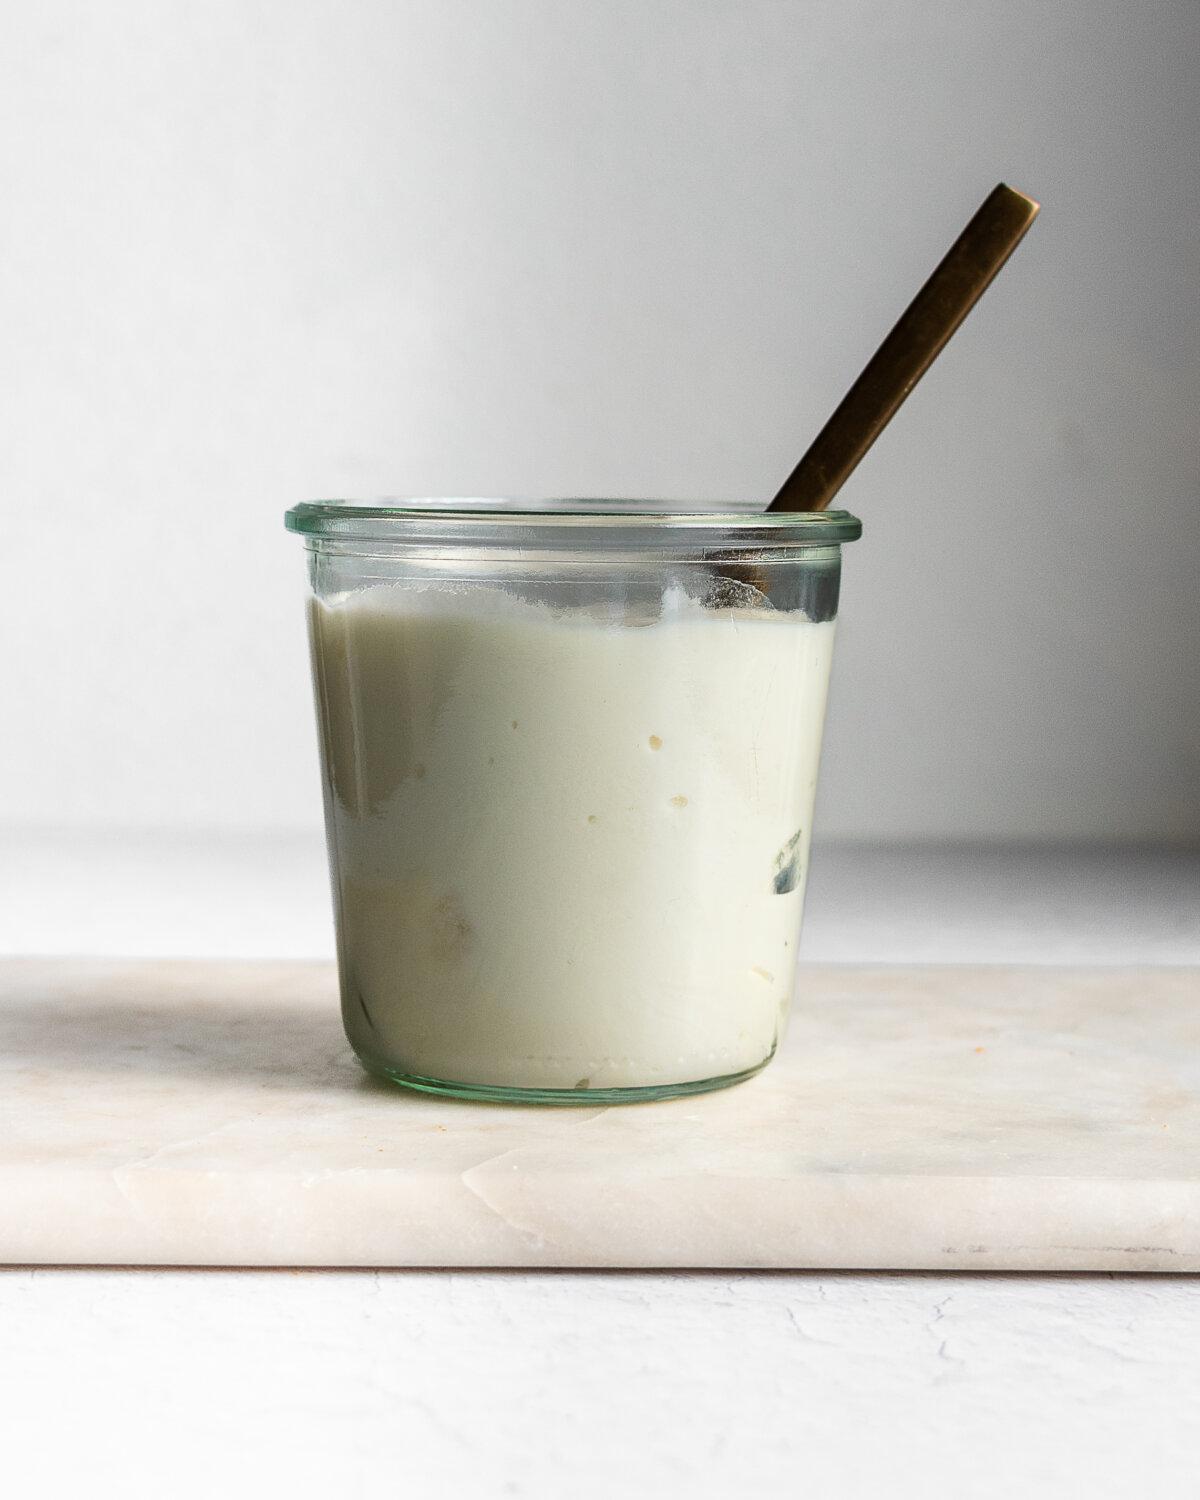 Homemade yogurt can be started with plain yogurt from the grocery store. (Jennifer McGruther)